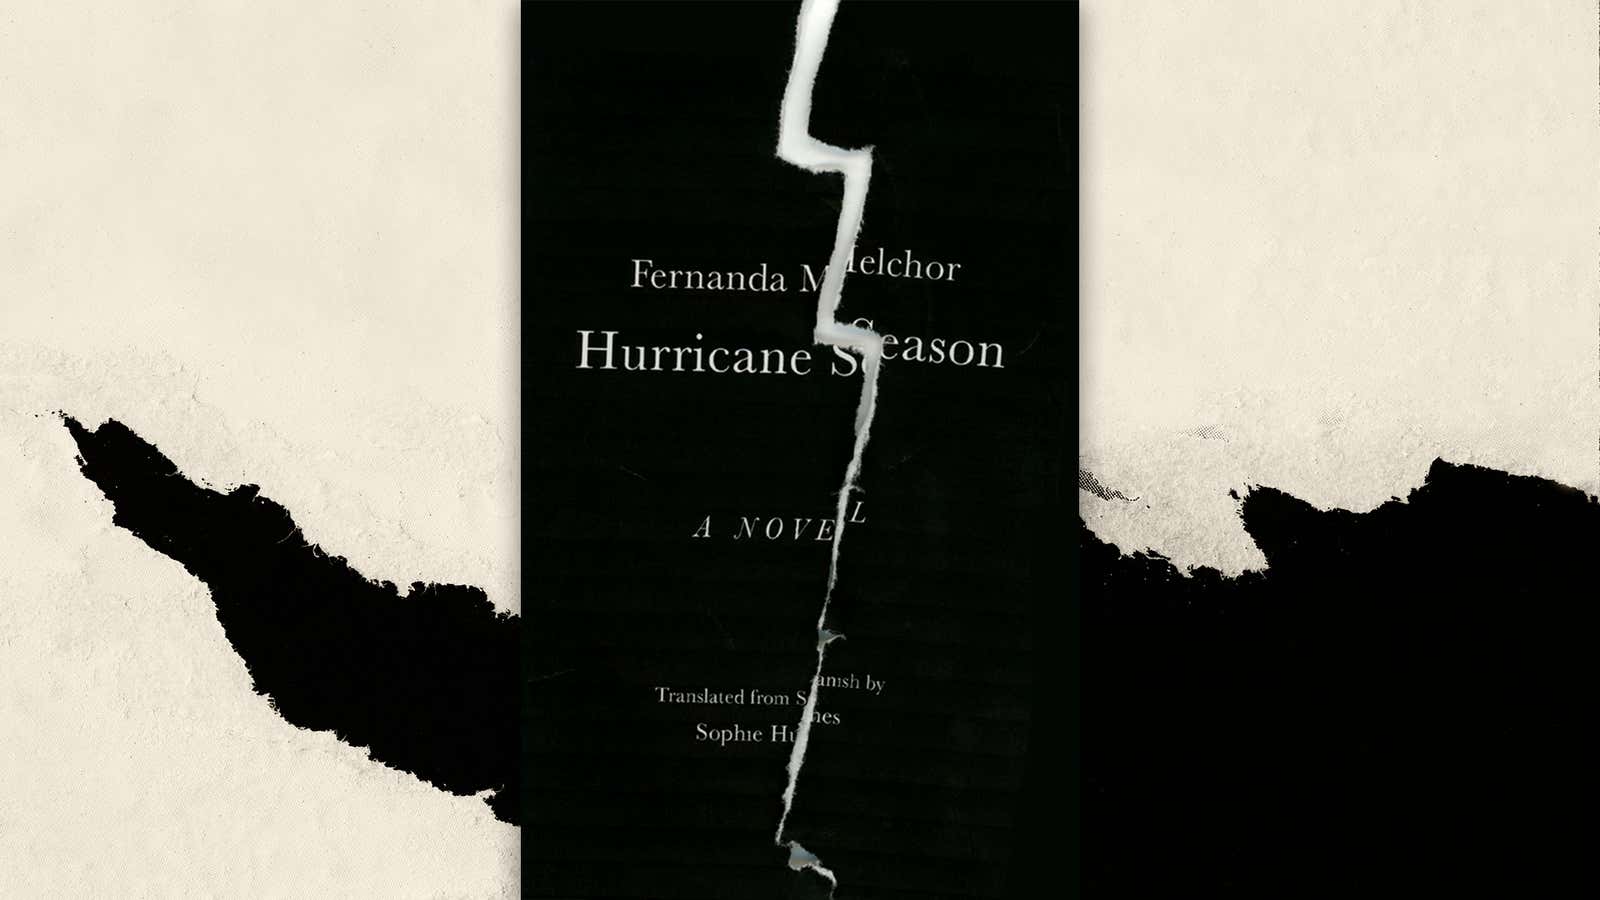 <i>Hurricane Season</i> lets loose a tempest of superstition and violence in small-town Mexico